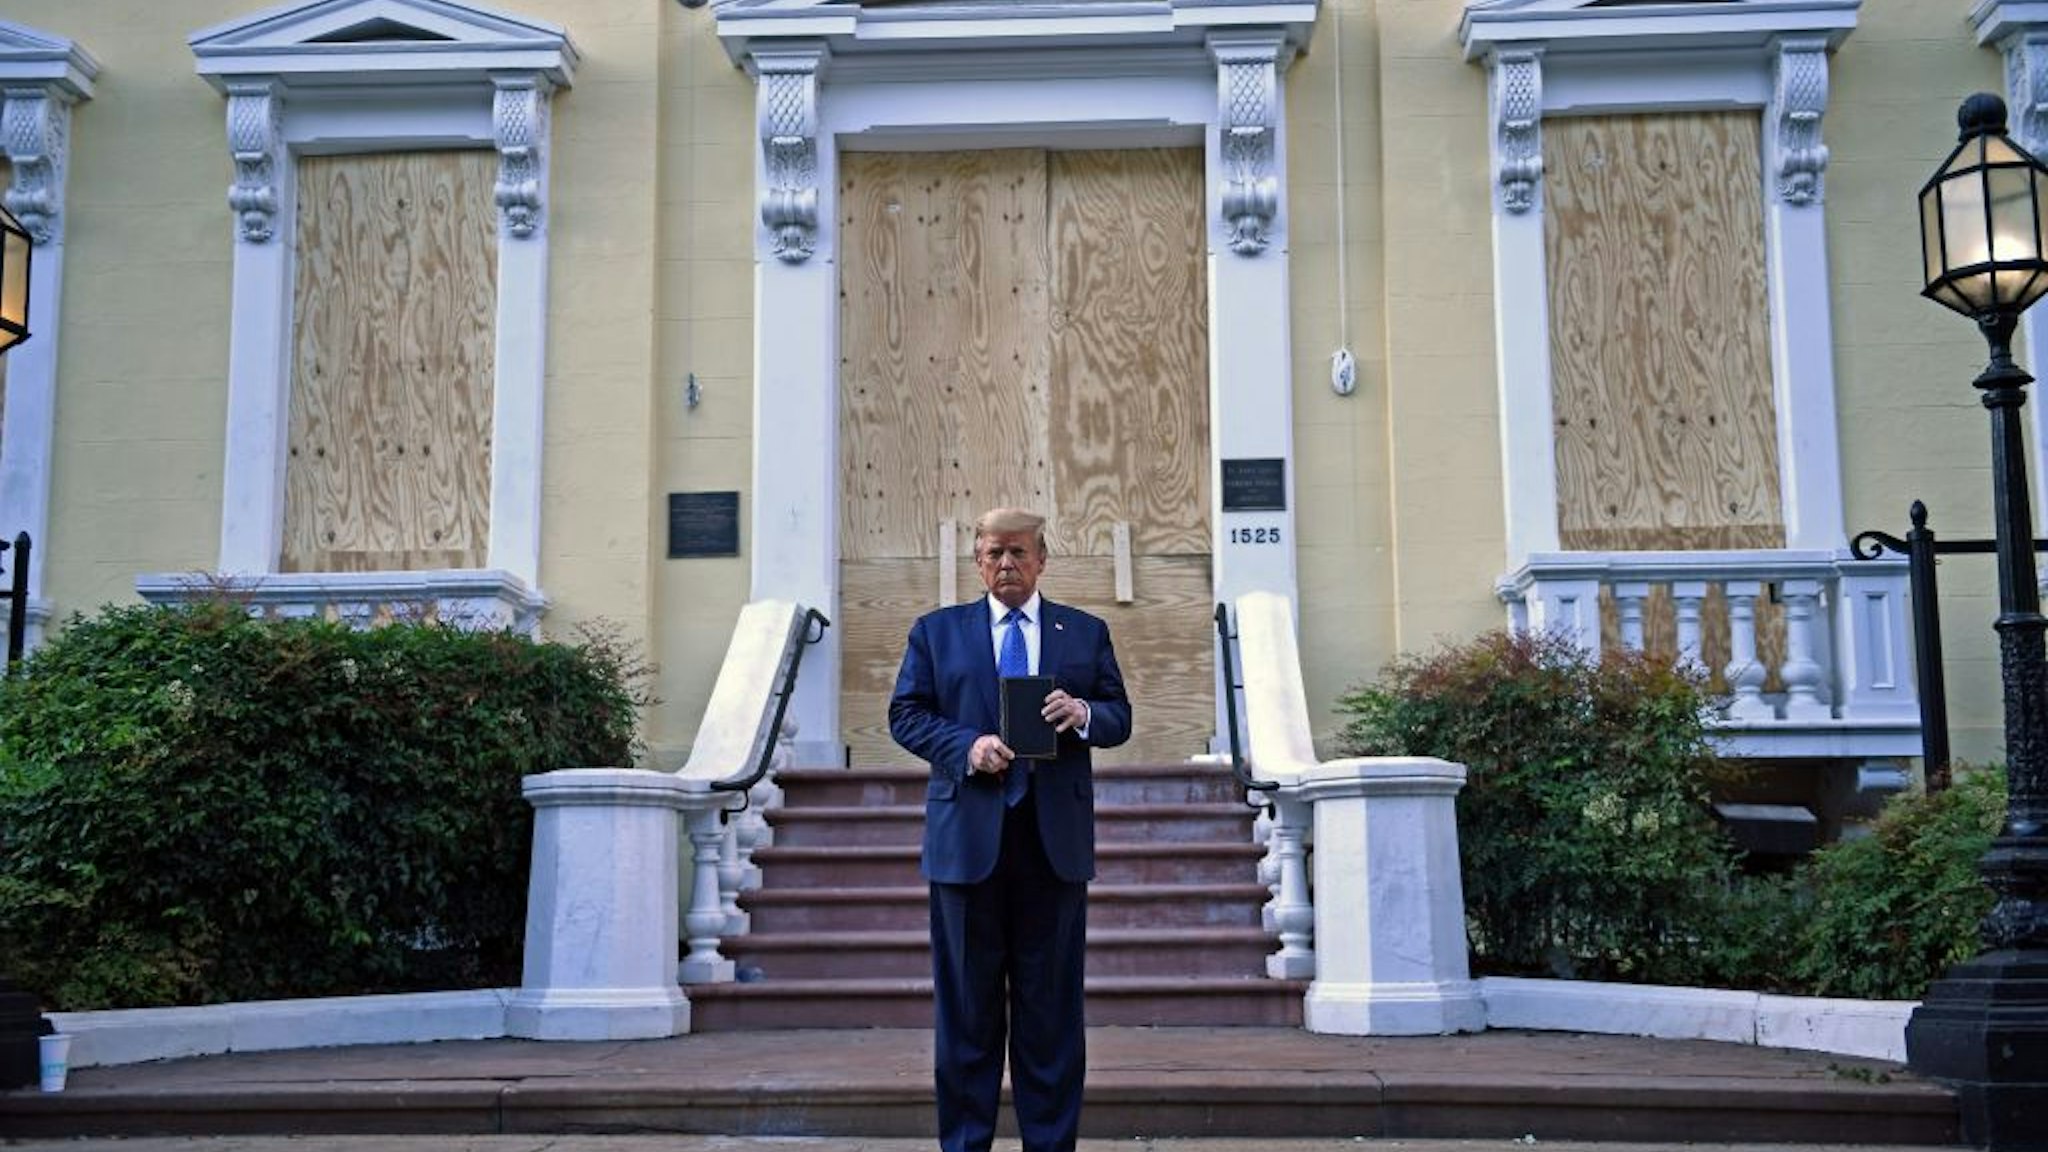 US President Donald Trump holds up a Bible outside of St John's Episcopal church across Lafayette Park in Washington, DC on June 1, 2020.